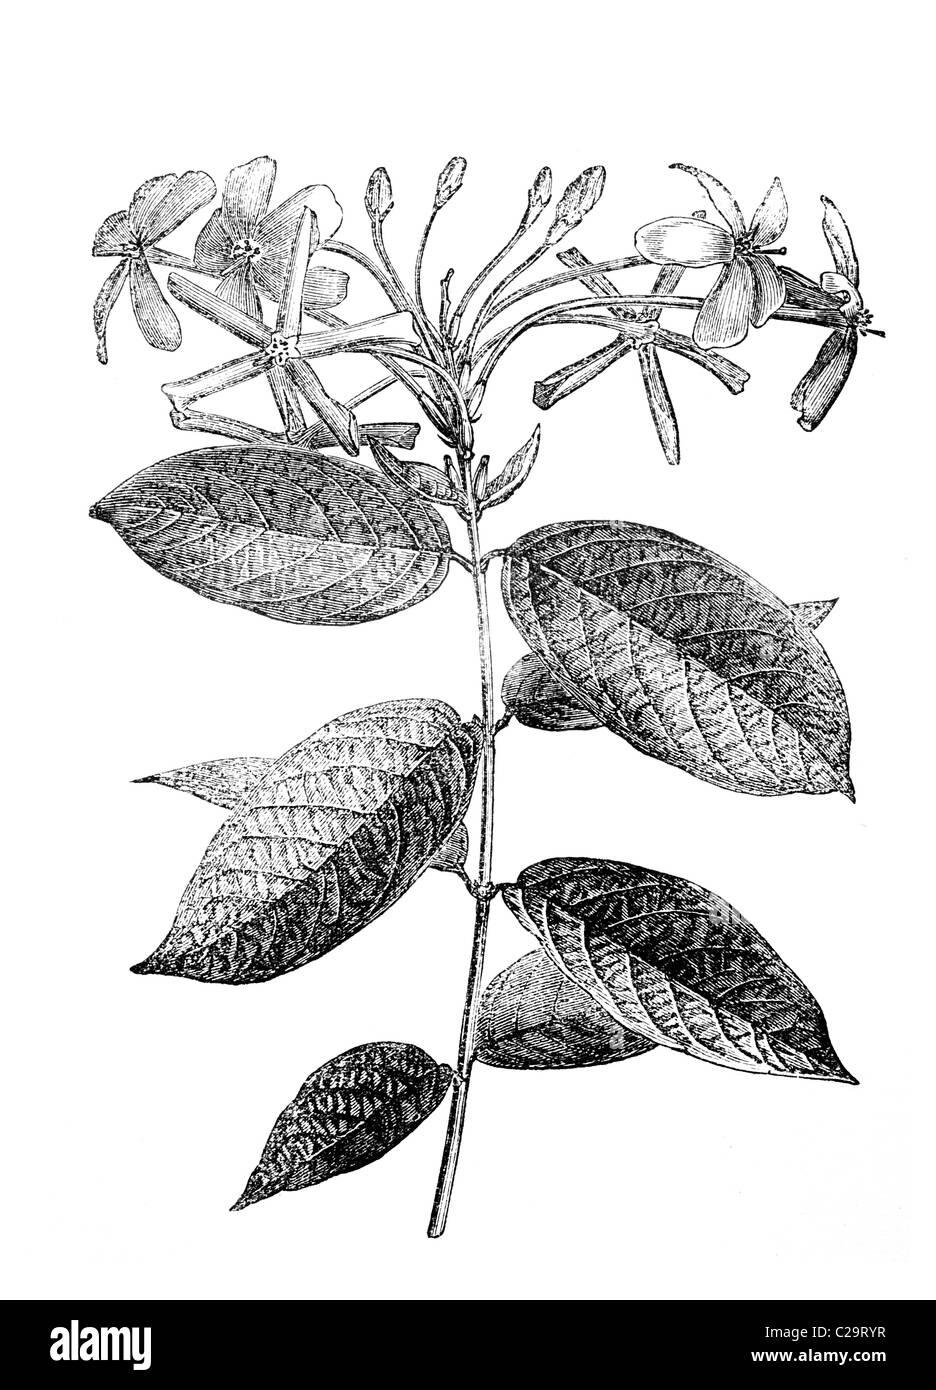 Quisqualis indica, Sweet Scented Stove Climber, 19th century illustration Stock Photo